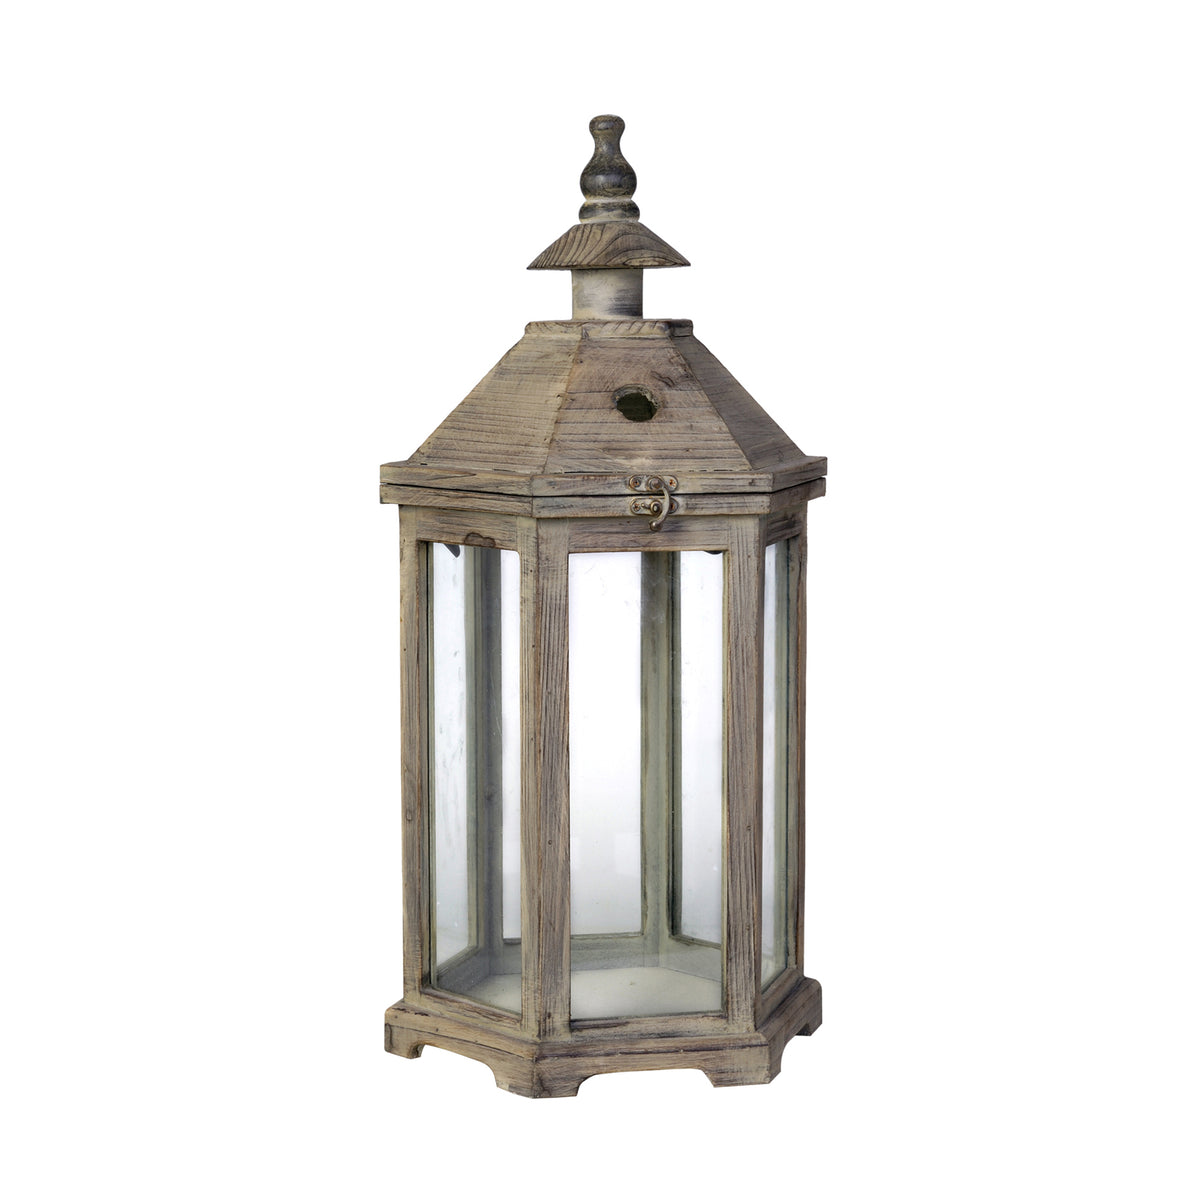 Temple Design Wooden Lantern with Glass Panels, Brown, Set of 2 - BM200912